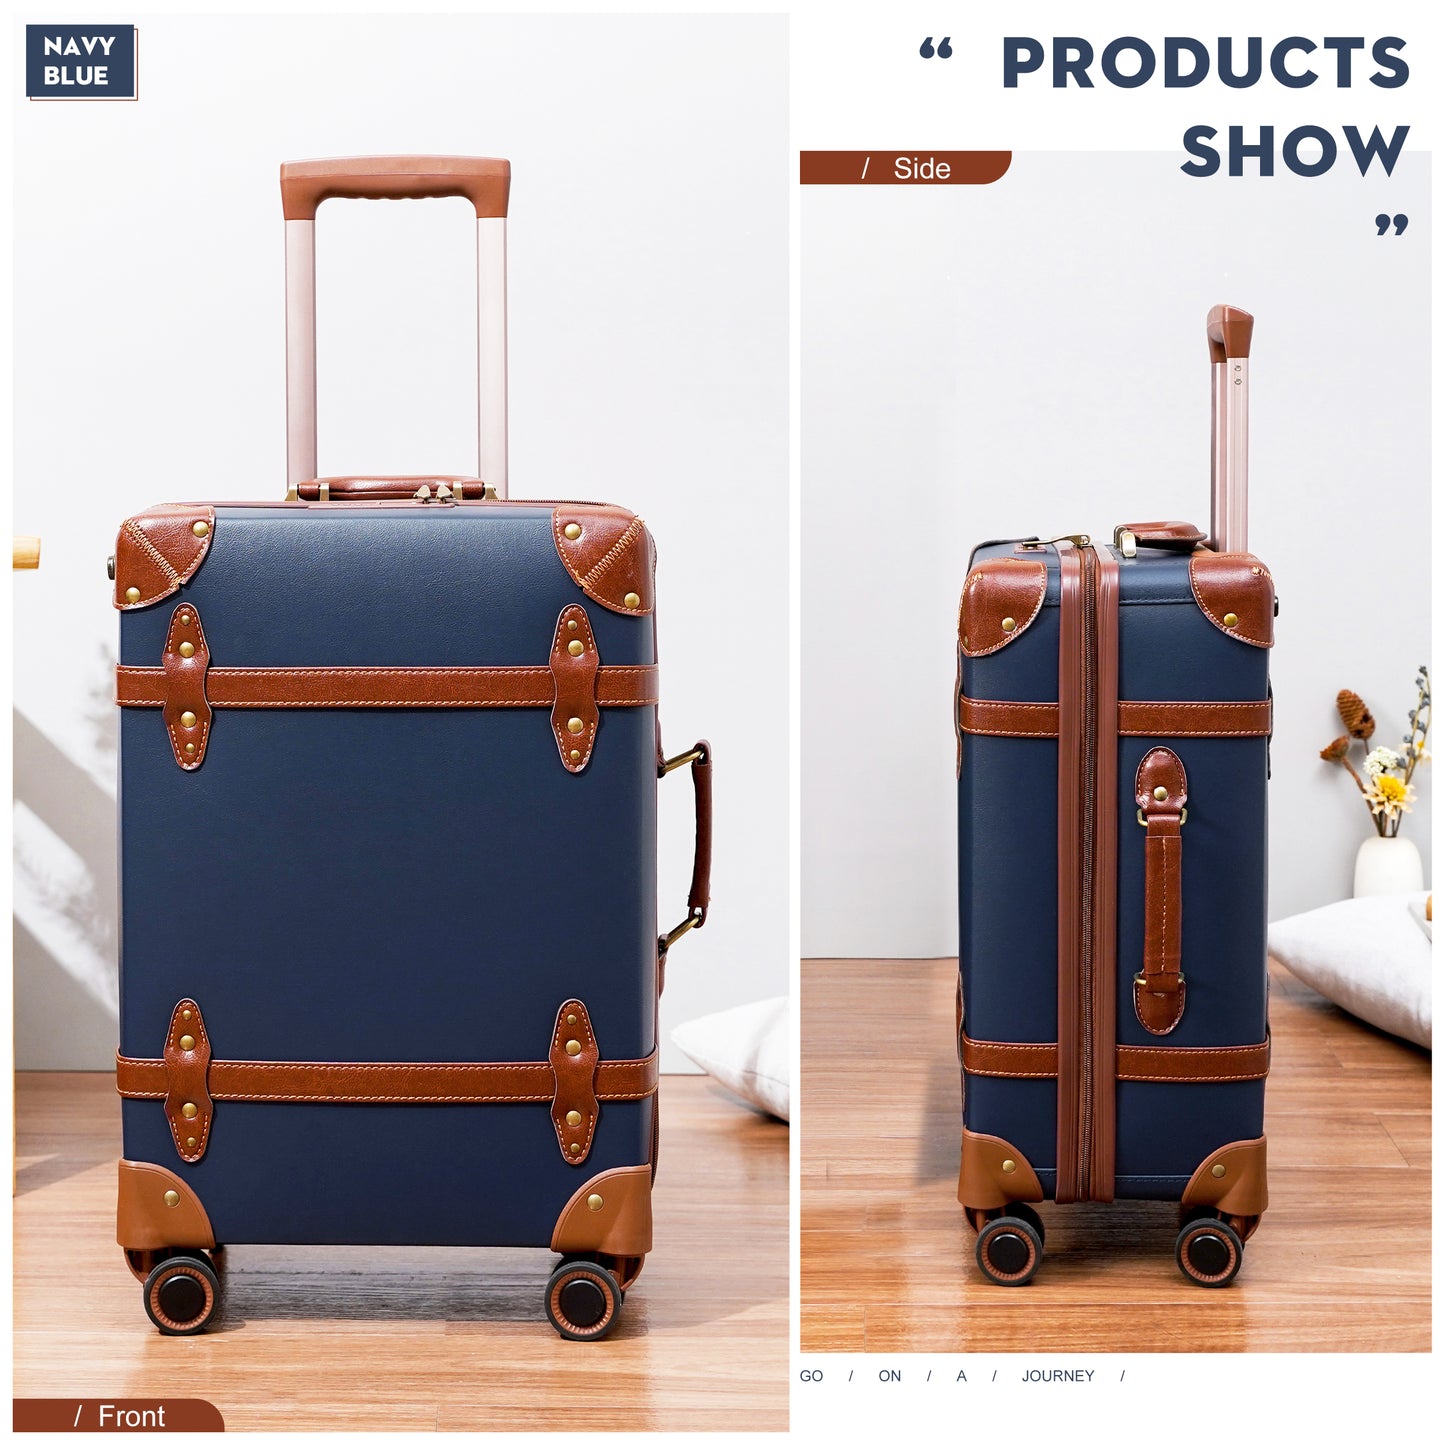 NZBZ Vintage Luggage Sets 3 Pieces Luxury Cute Suitcase Retro Trunk Luggage with TSA Lock for Men and Women (Navy Blue, 14" & 20" & 28")